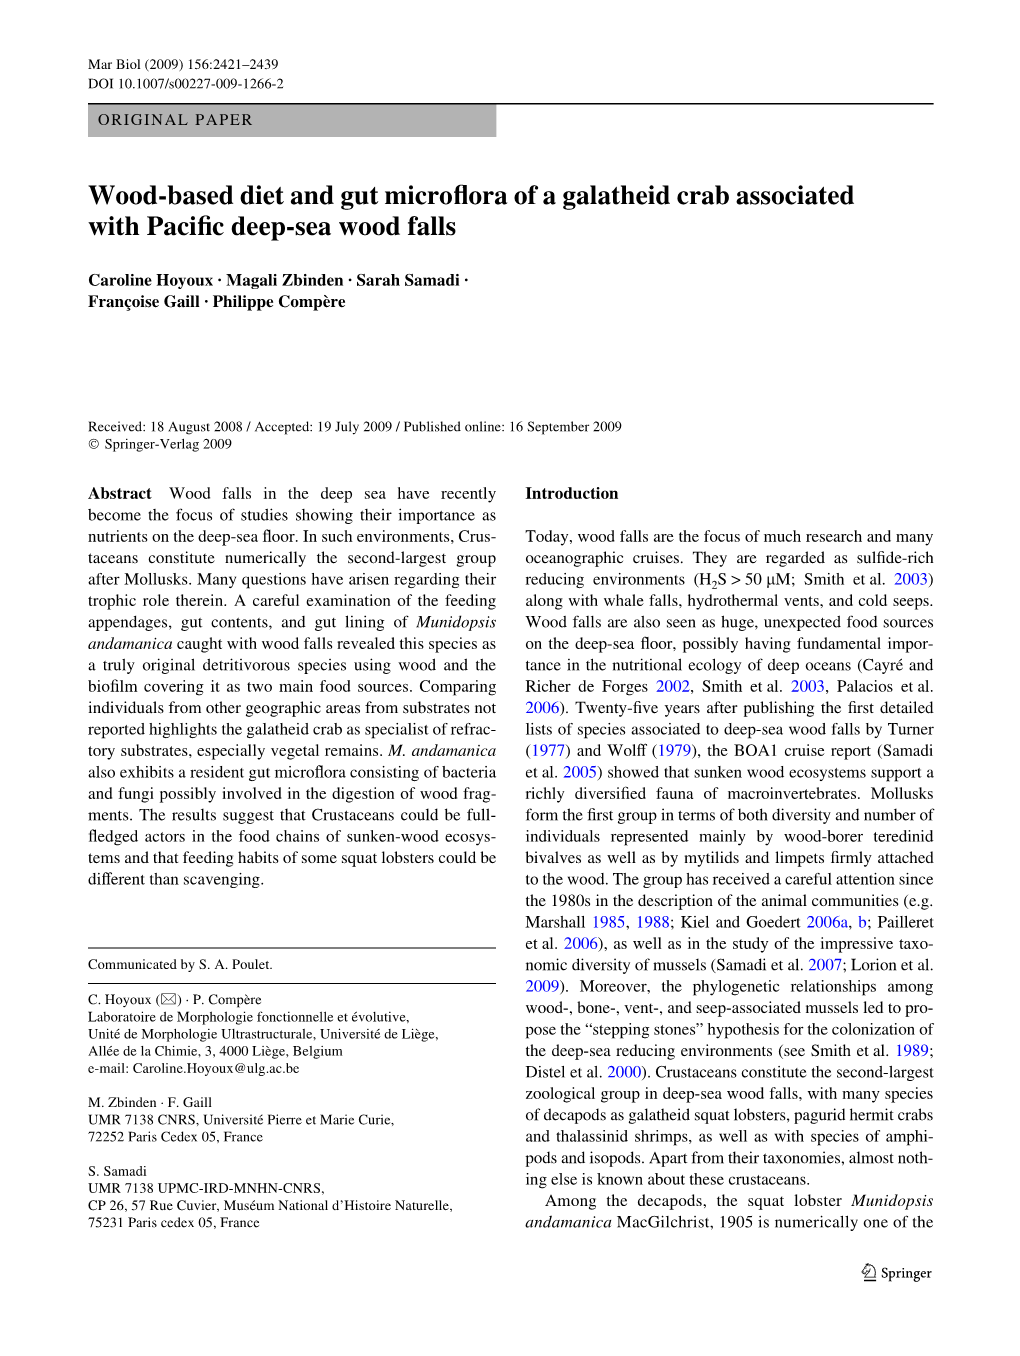 Wood-Based Diet and Gut Microxora of a Galatheid Crab Associated with Paciwc Deep-Sea Wood Falls